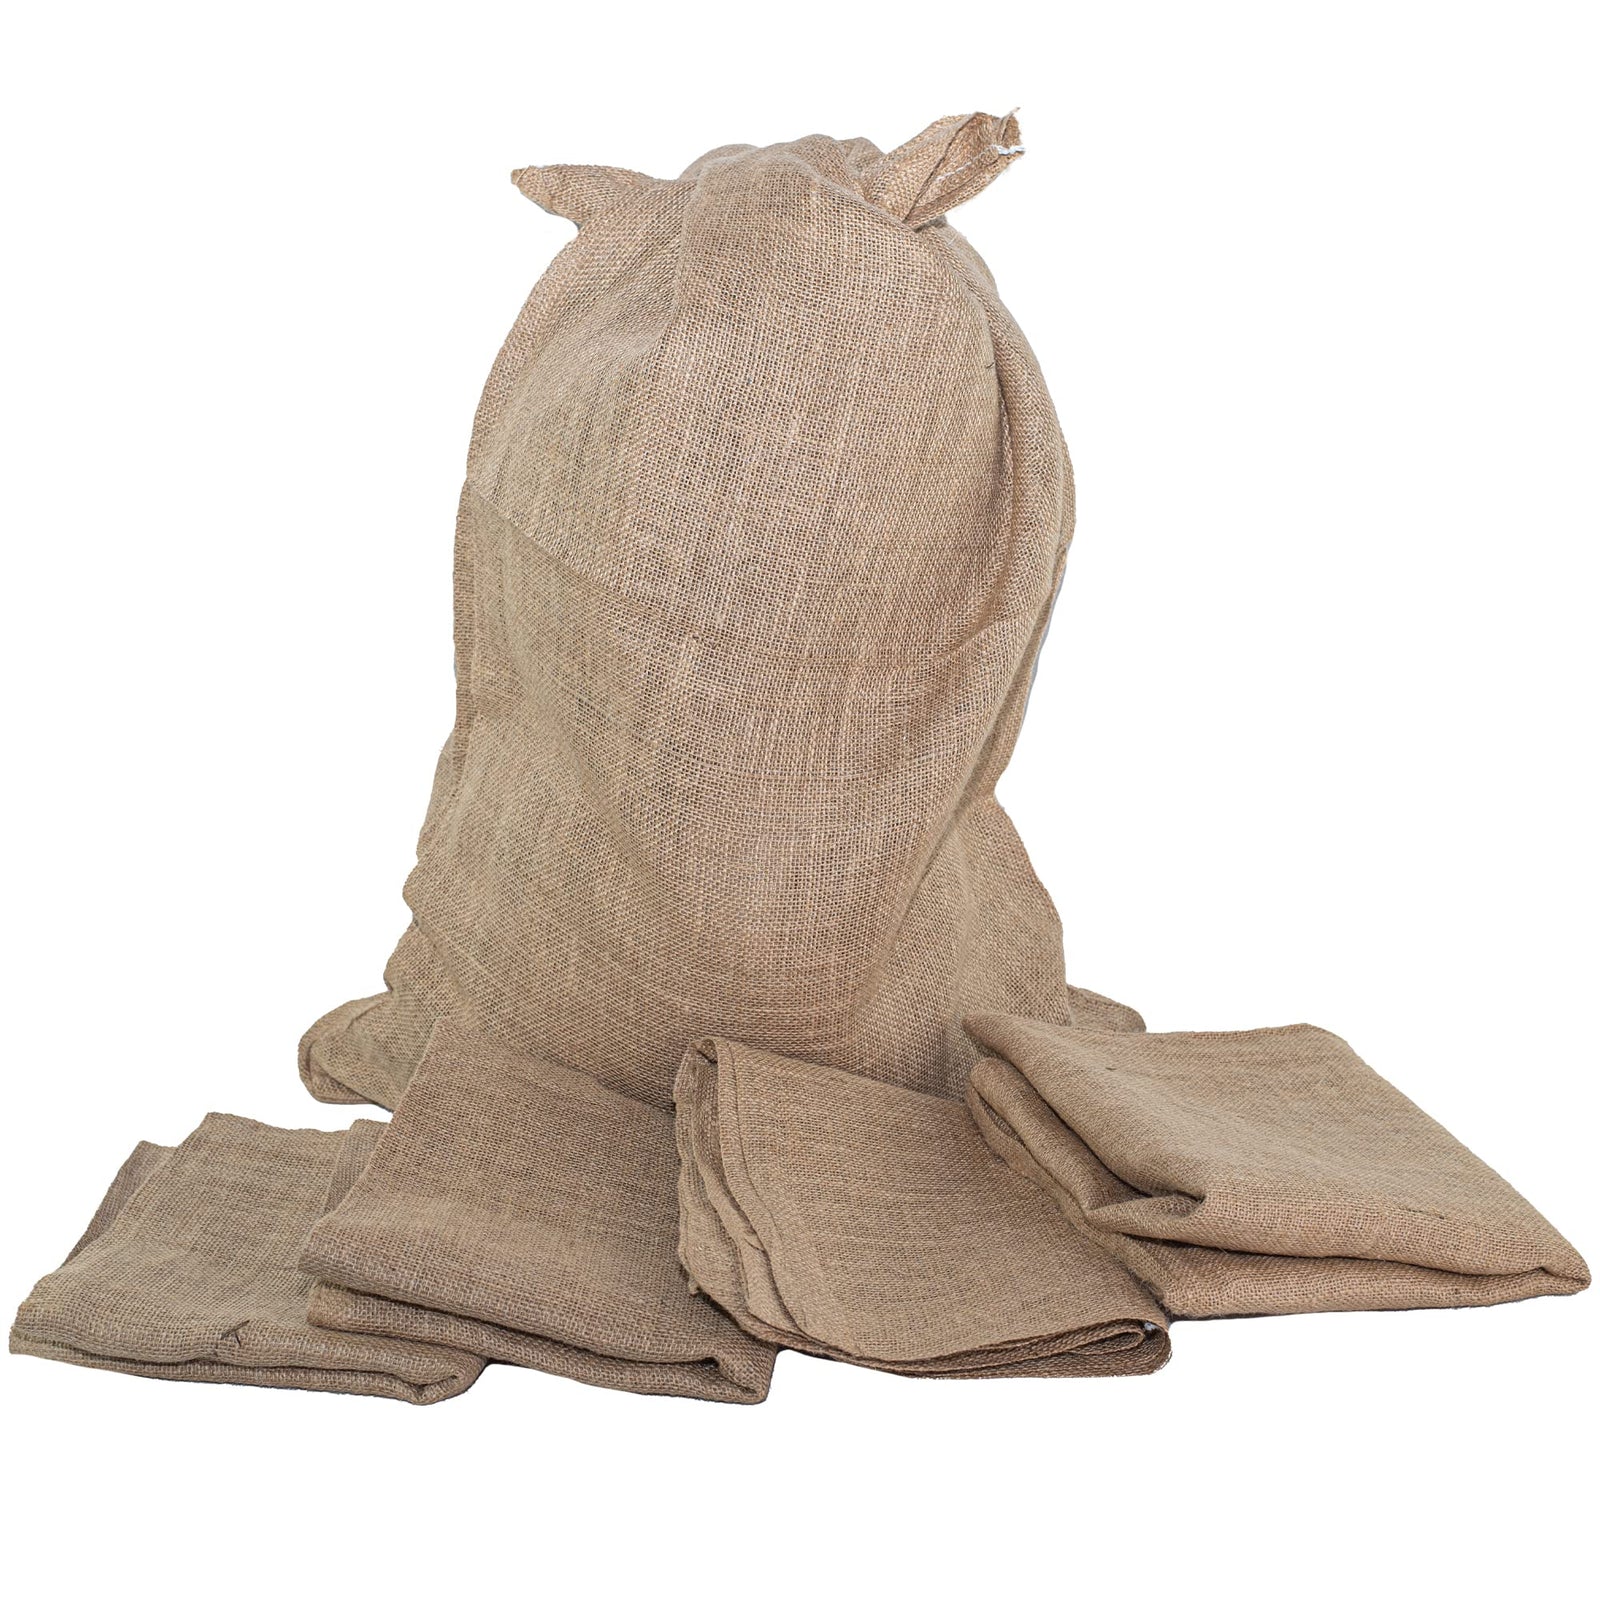 SGT KNOTS Burlap Bag - 24" x 40" Large Gunny Bags - 100% Biodegradable Reusable Food-Safe Sacks Perfect for Outdoor Games and Races Storing Vegetables and More Available in Single, 4, 6 and 8 Packs